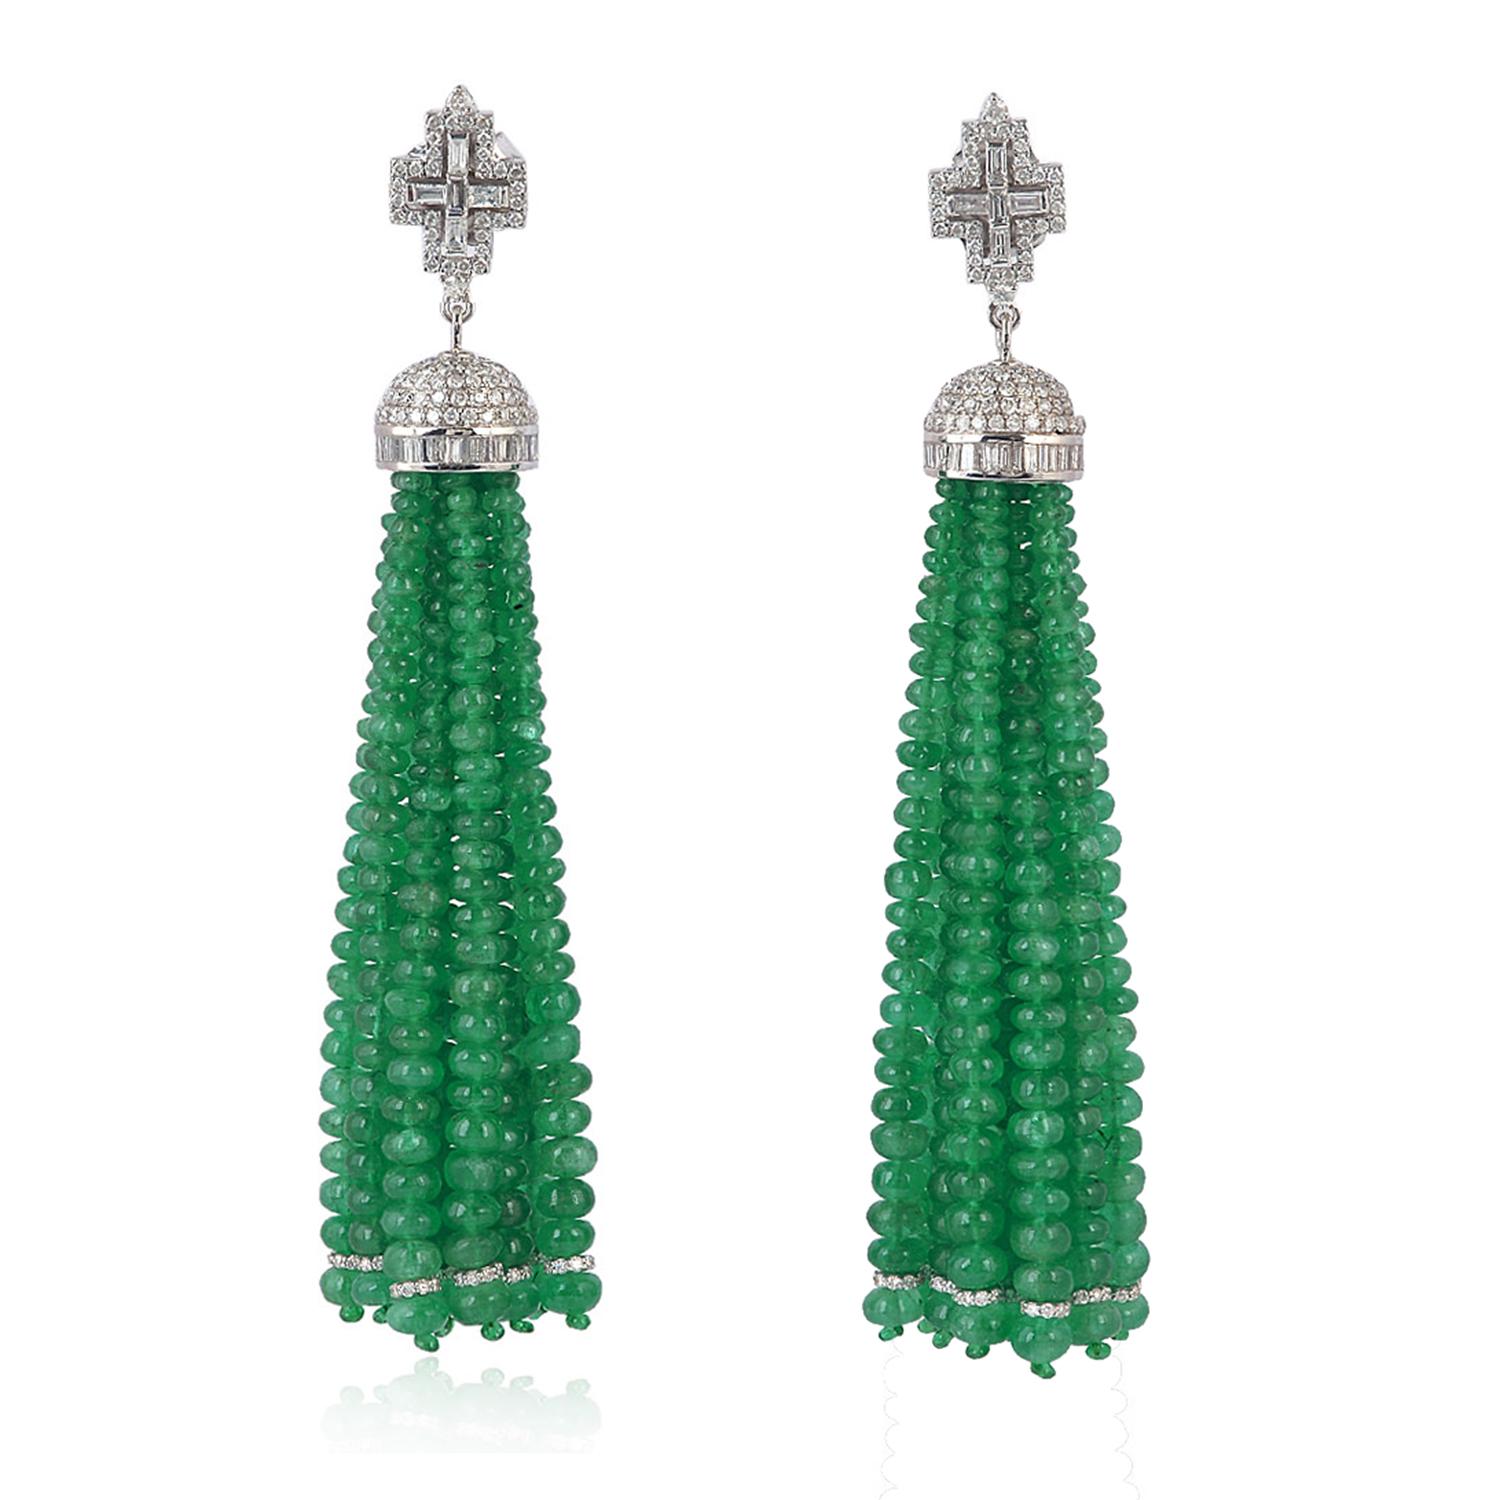 These stunning tassel earrings are handmade in 18-karat gold.  It is set with 128.1 carats emerald and 4.61 carats of glittering diamonds.

FOLLOW  MEGHNA JEWELS storefront to view the latest collection & exclusive pieces.  Meghna Jewels is proudly